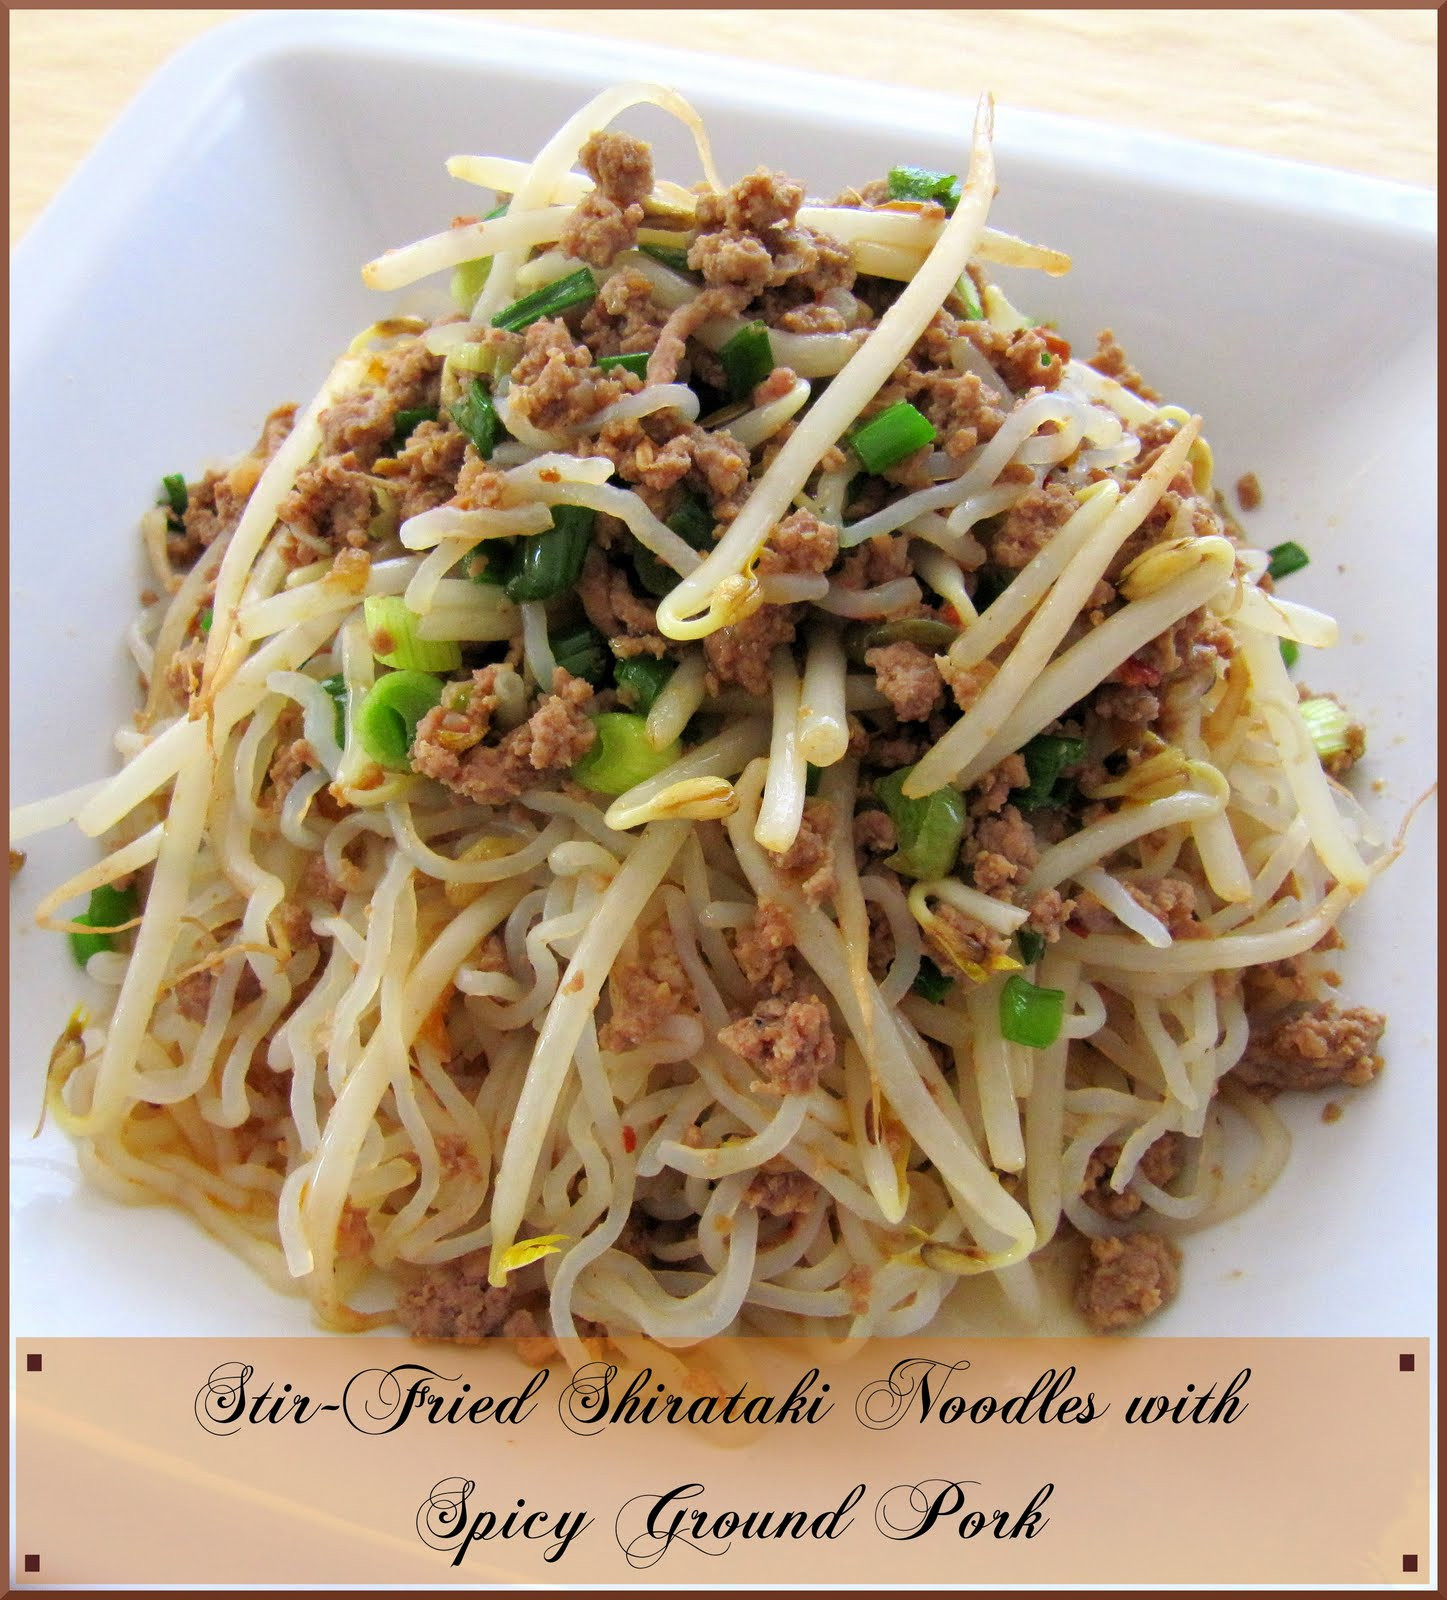 Noodles Carbohydrate Amount
 Stir Fried Shirataki Noodles with Spicy Ground Pork